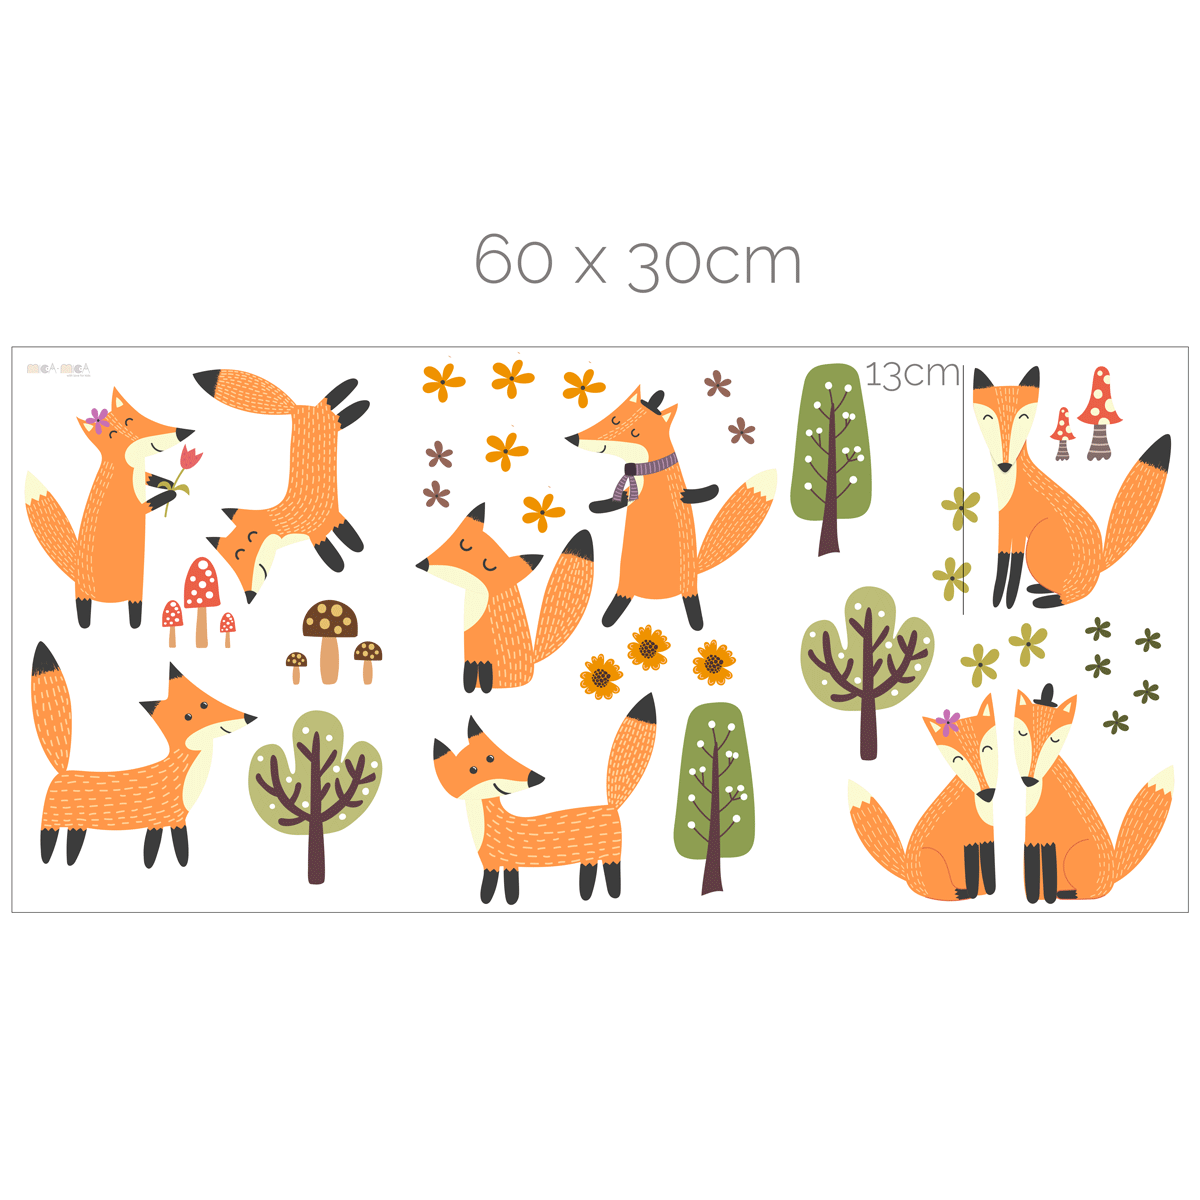 Woodland wall stickers - Cute foxes, trees and flowers